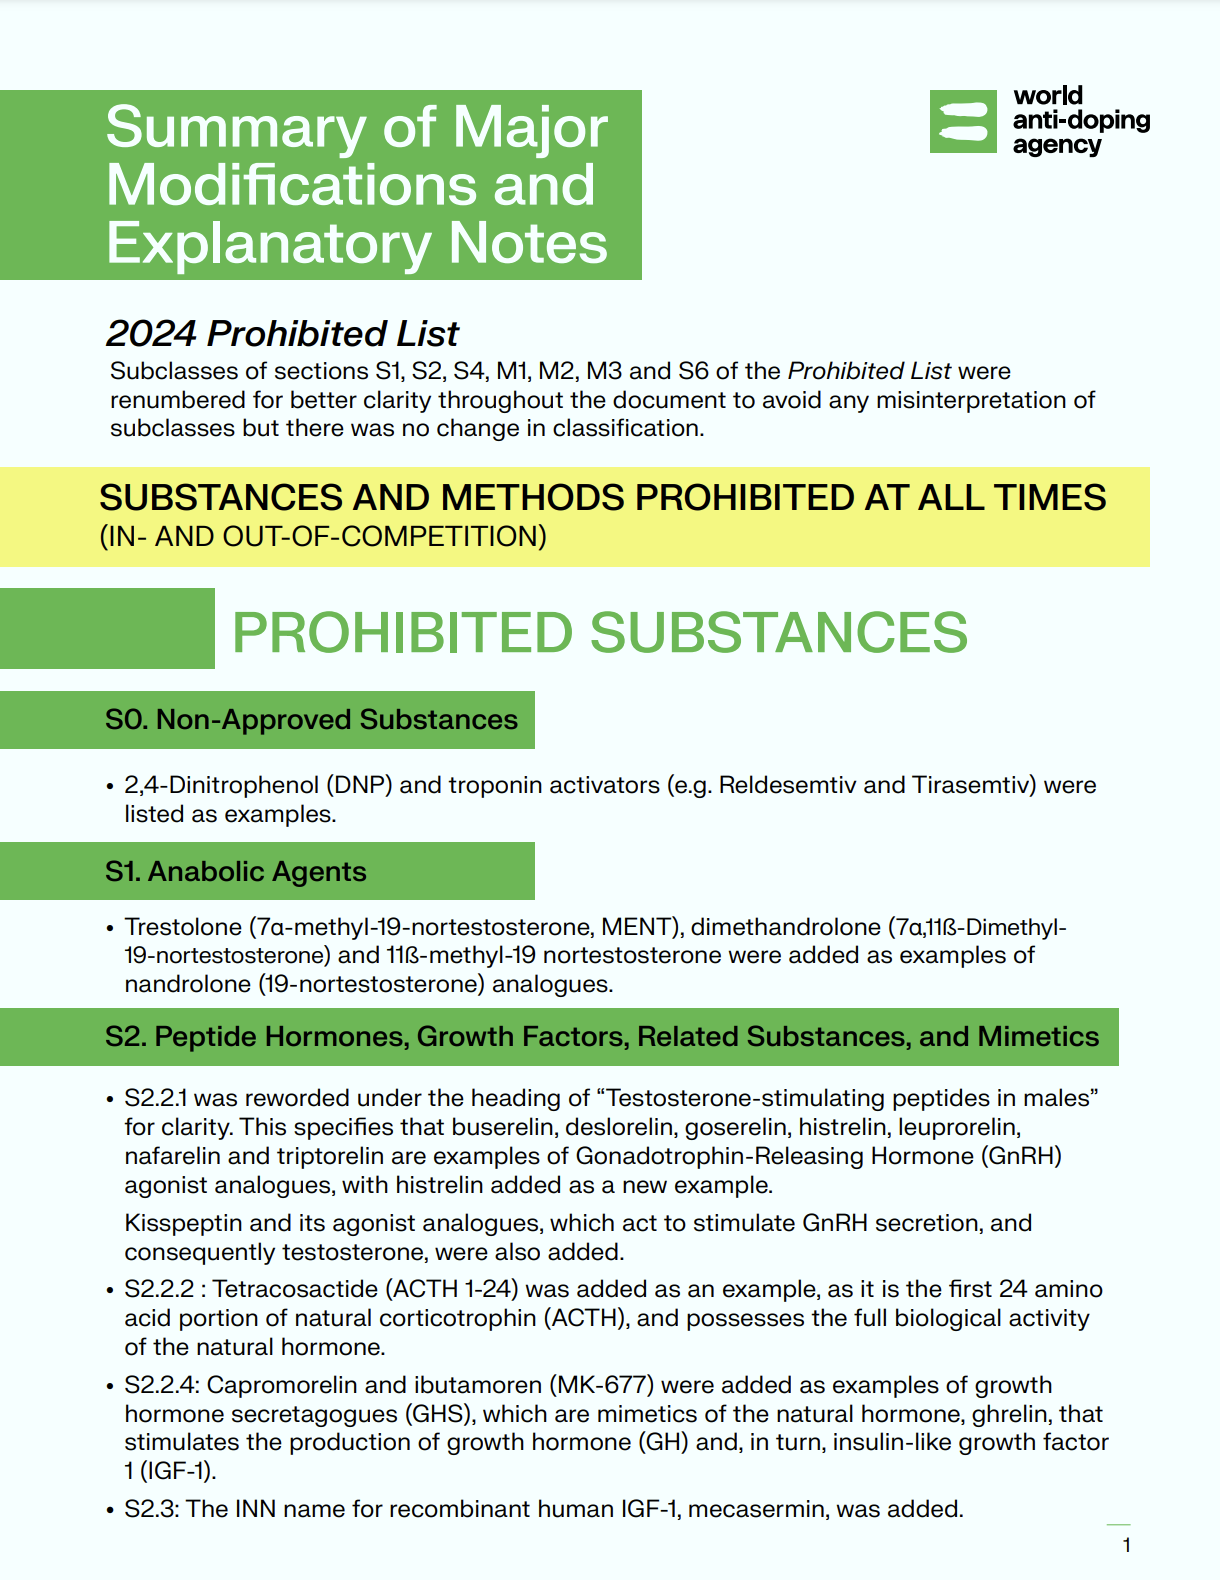 Summary of Major Modifications and Explanatory Notes to the 2024 Prohibited List